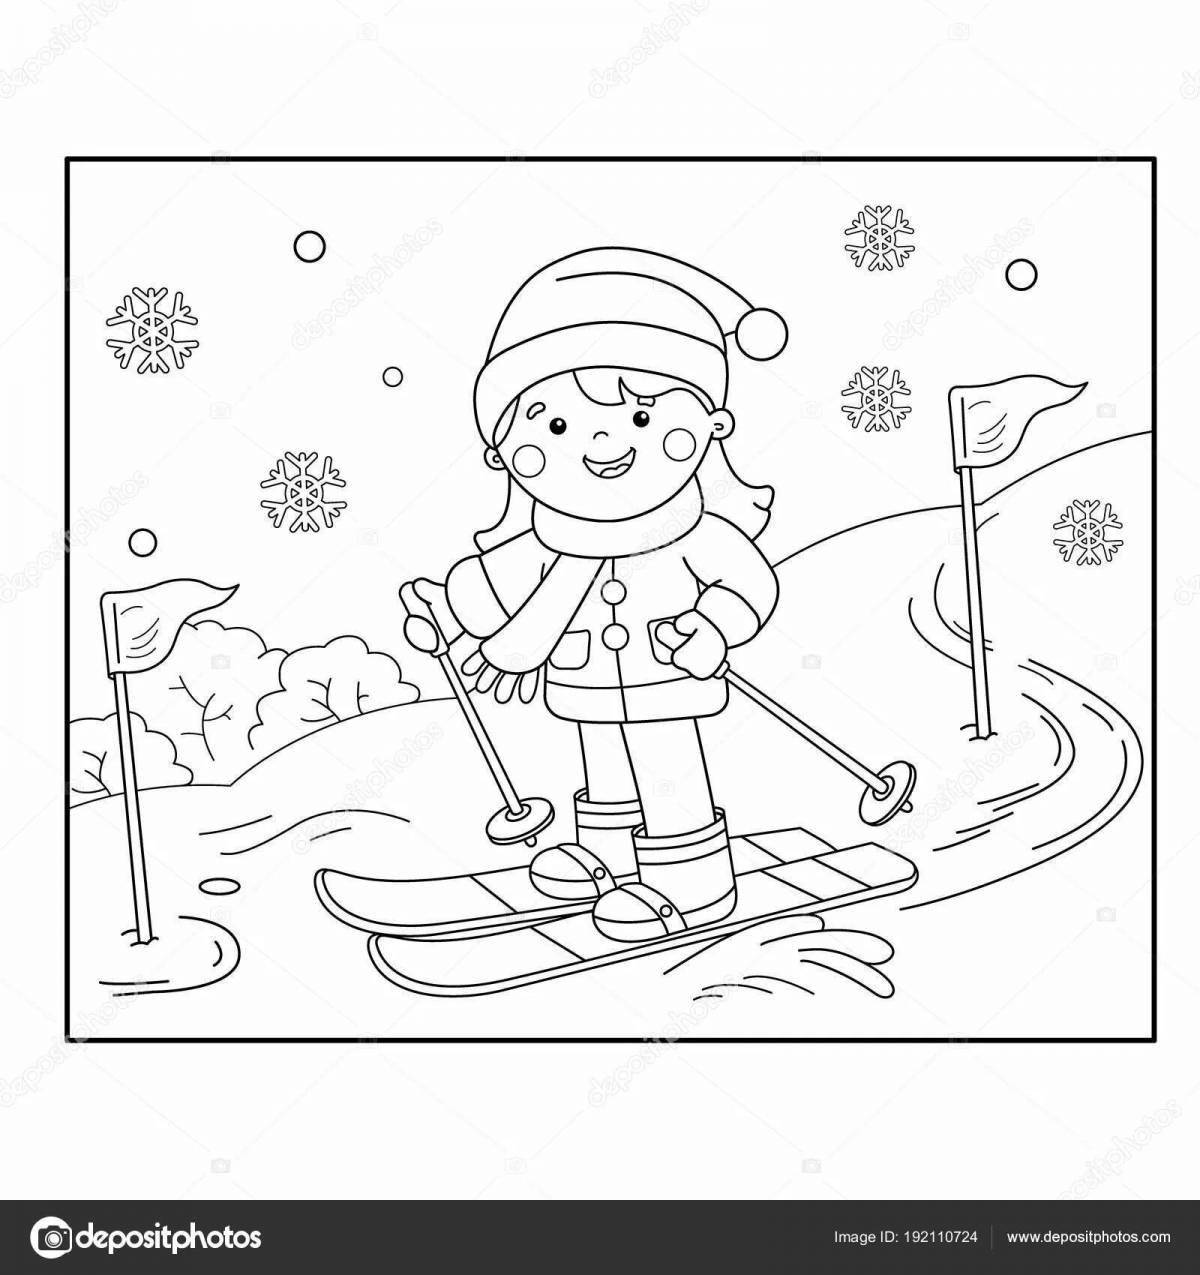 Coloring page happy skier for children 5-6 years old